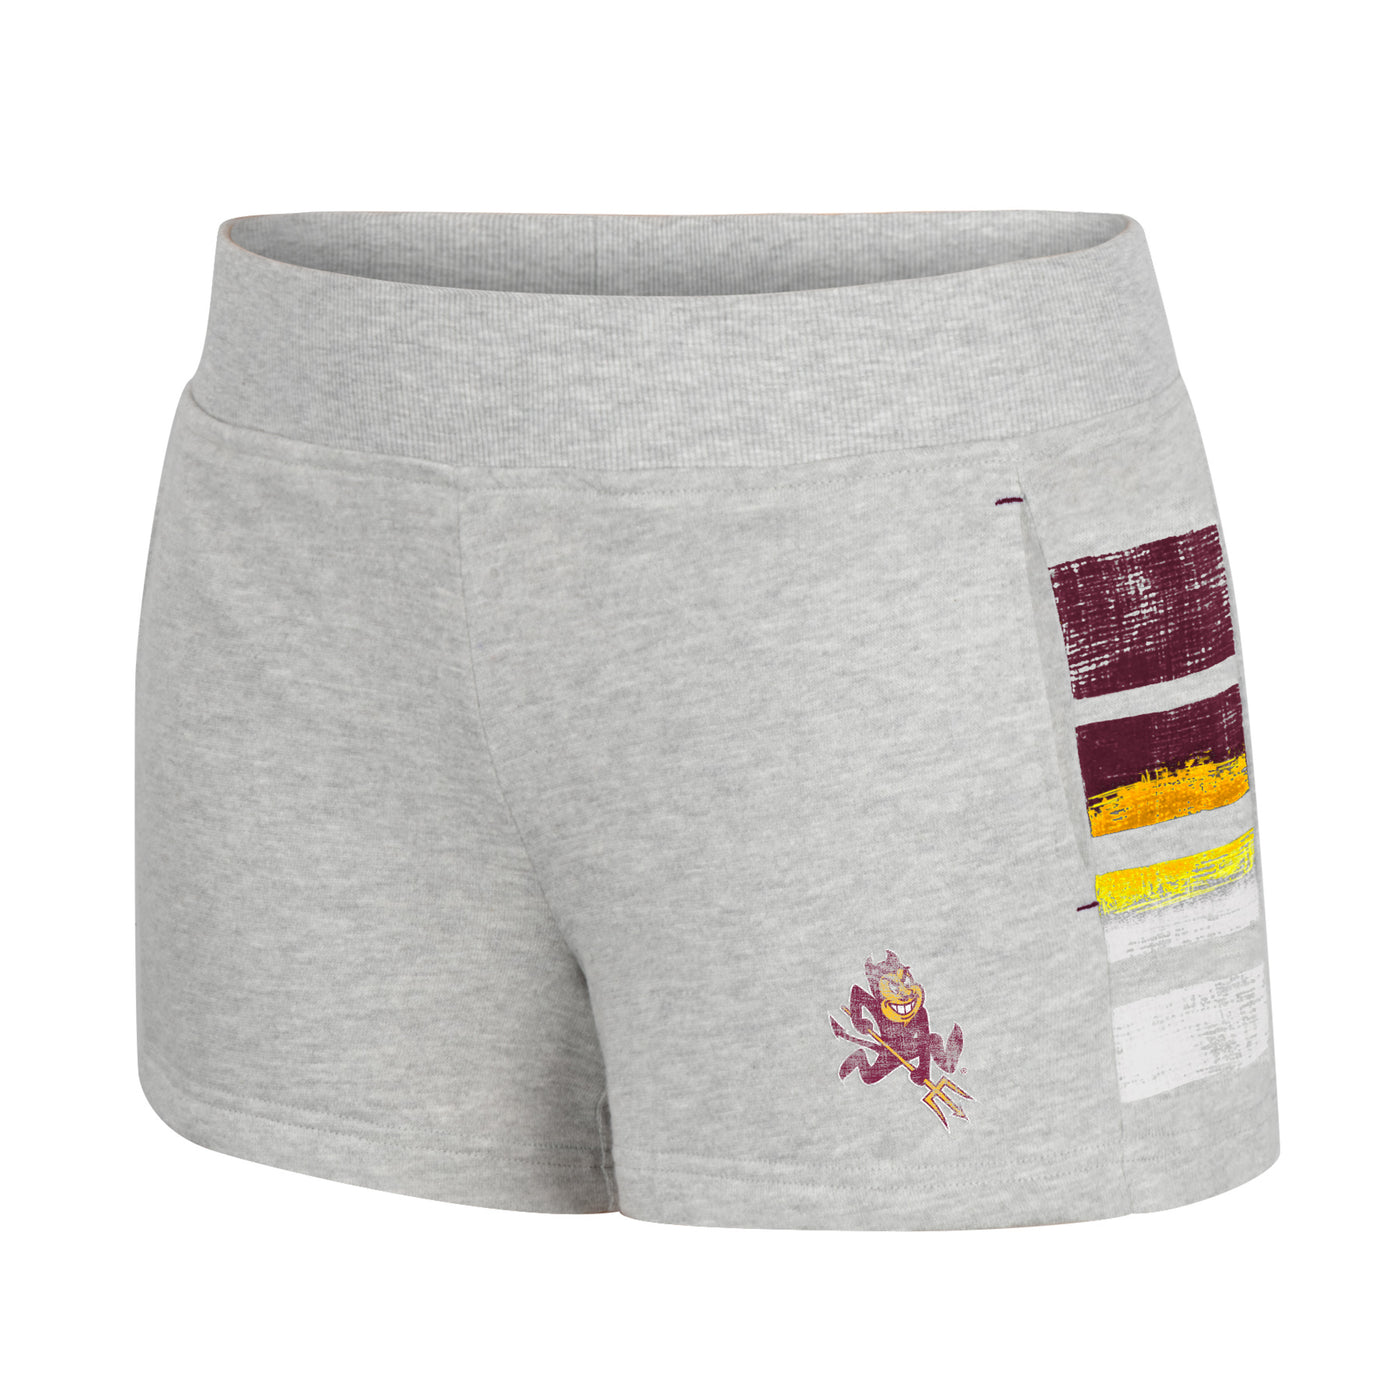 ASU gray women's shorts with maroon, gold, and white side the side panels and Sparky on the left leg